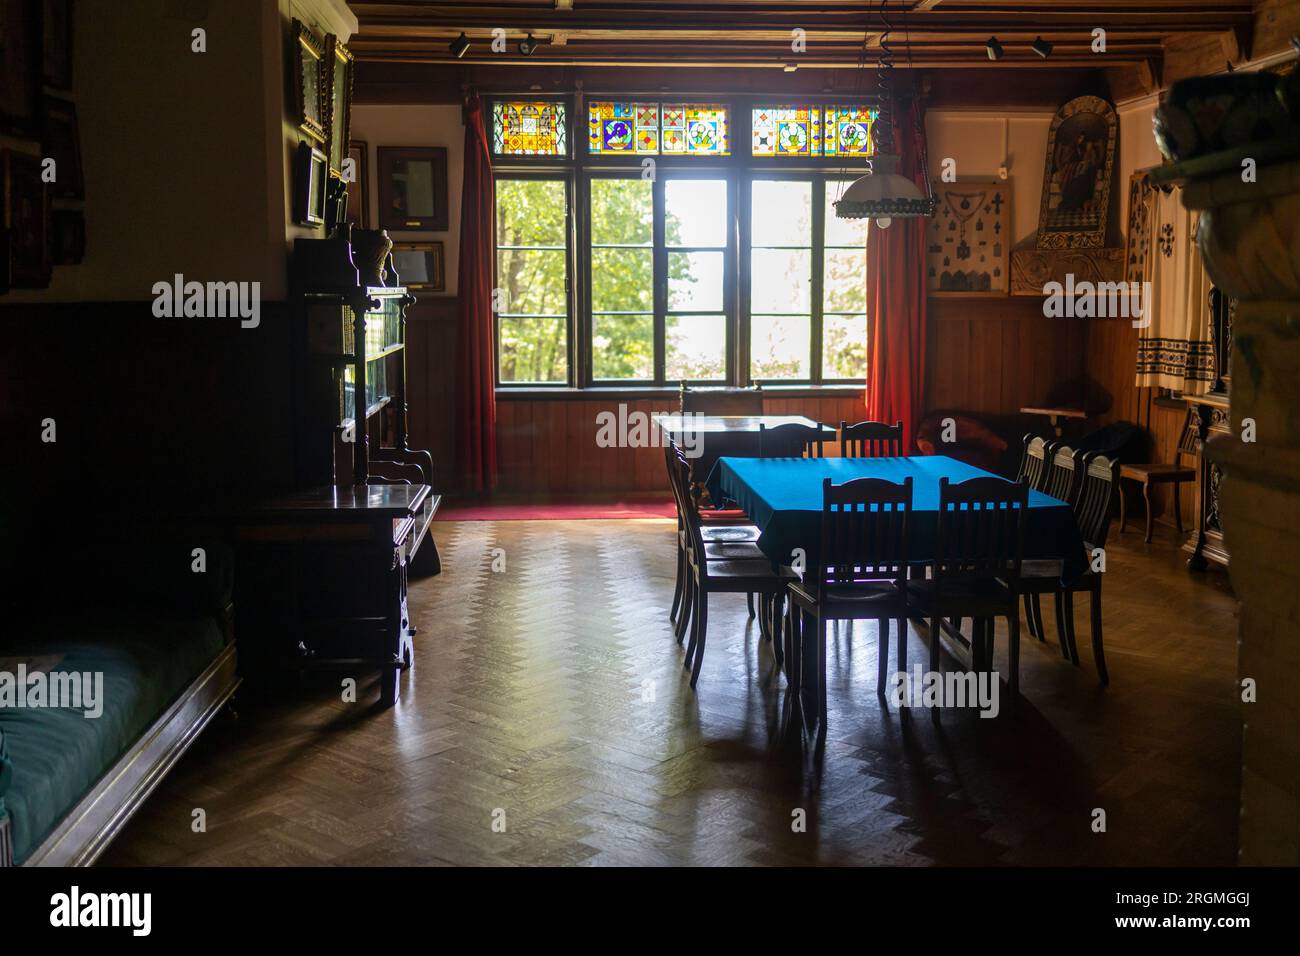 Polenovo, Tula region - June 12, 2017 - Vintage design of living room in antique manor of the artist Polenov. Museum old furniture of early 20th centu Stock Photo